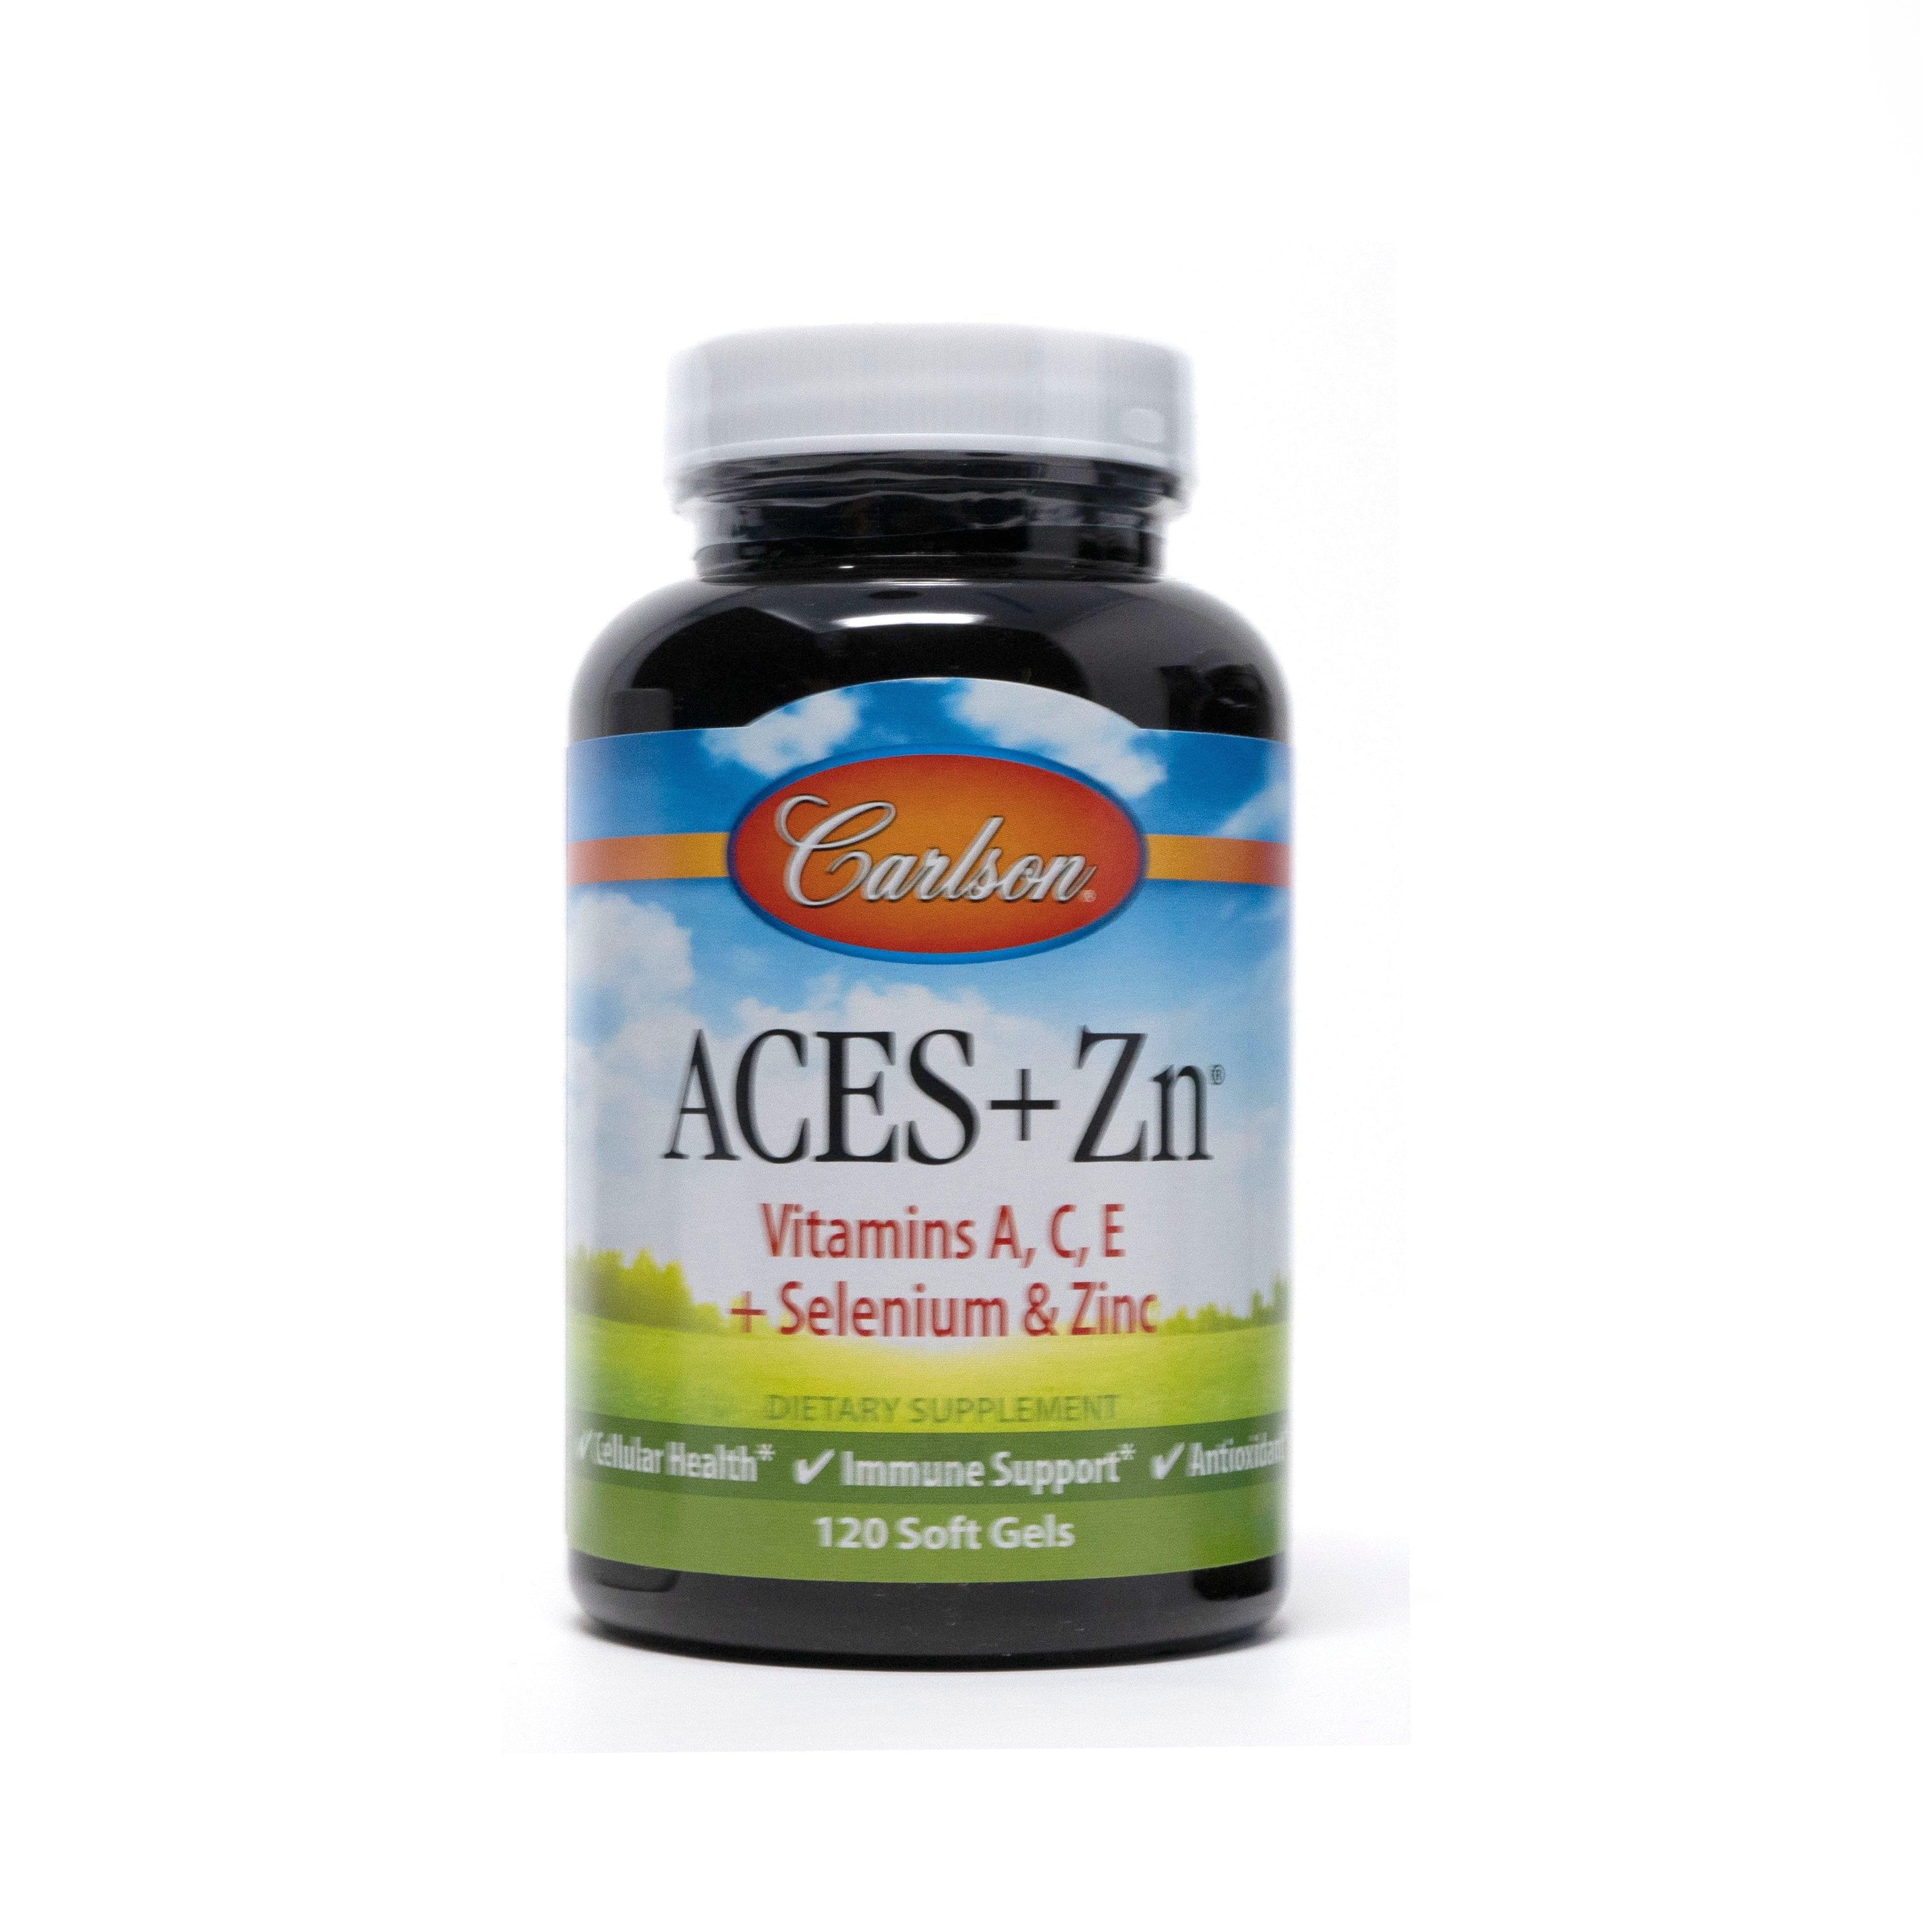 ACES+Zn Softgels.